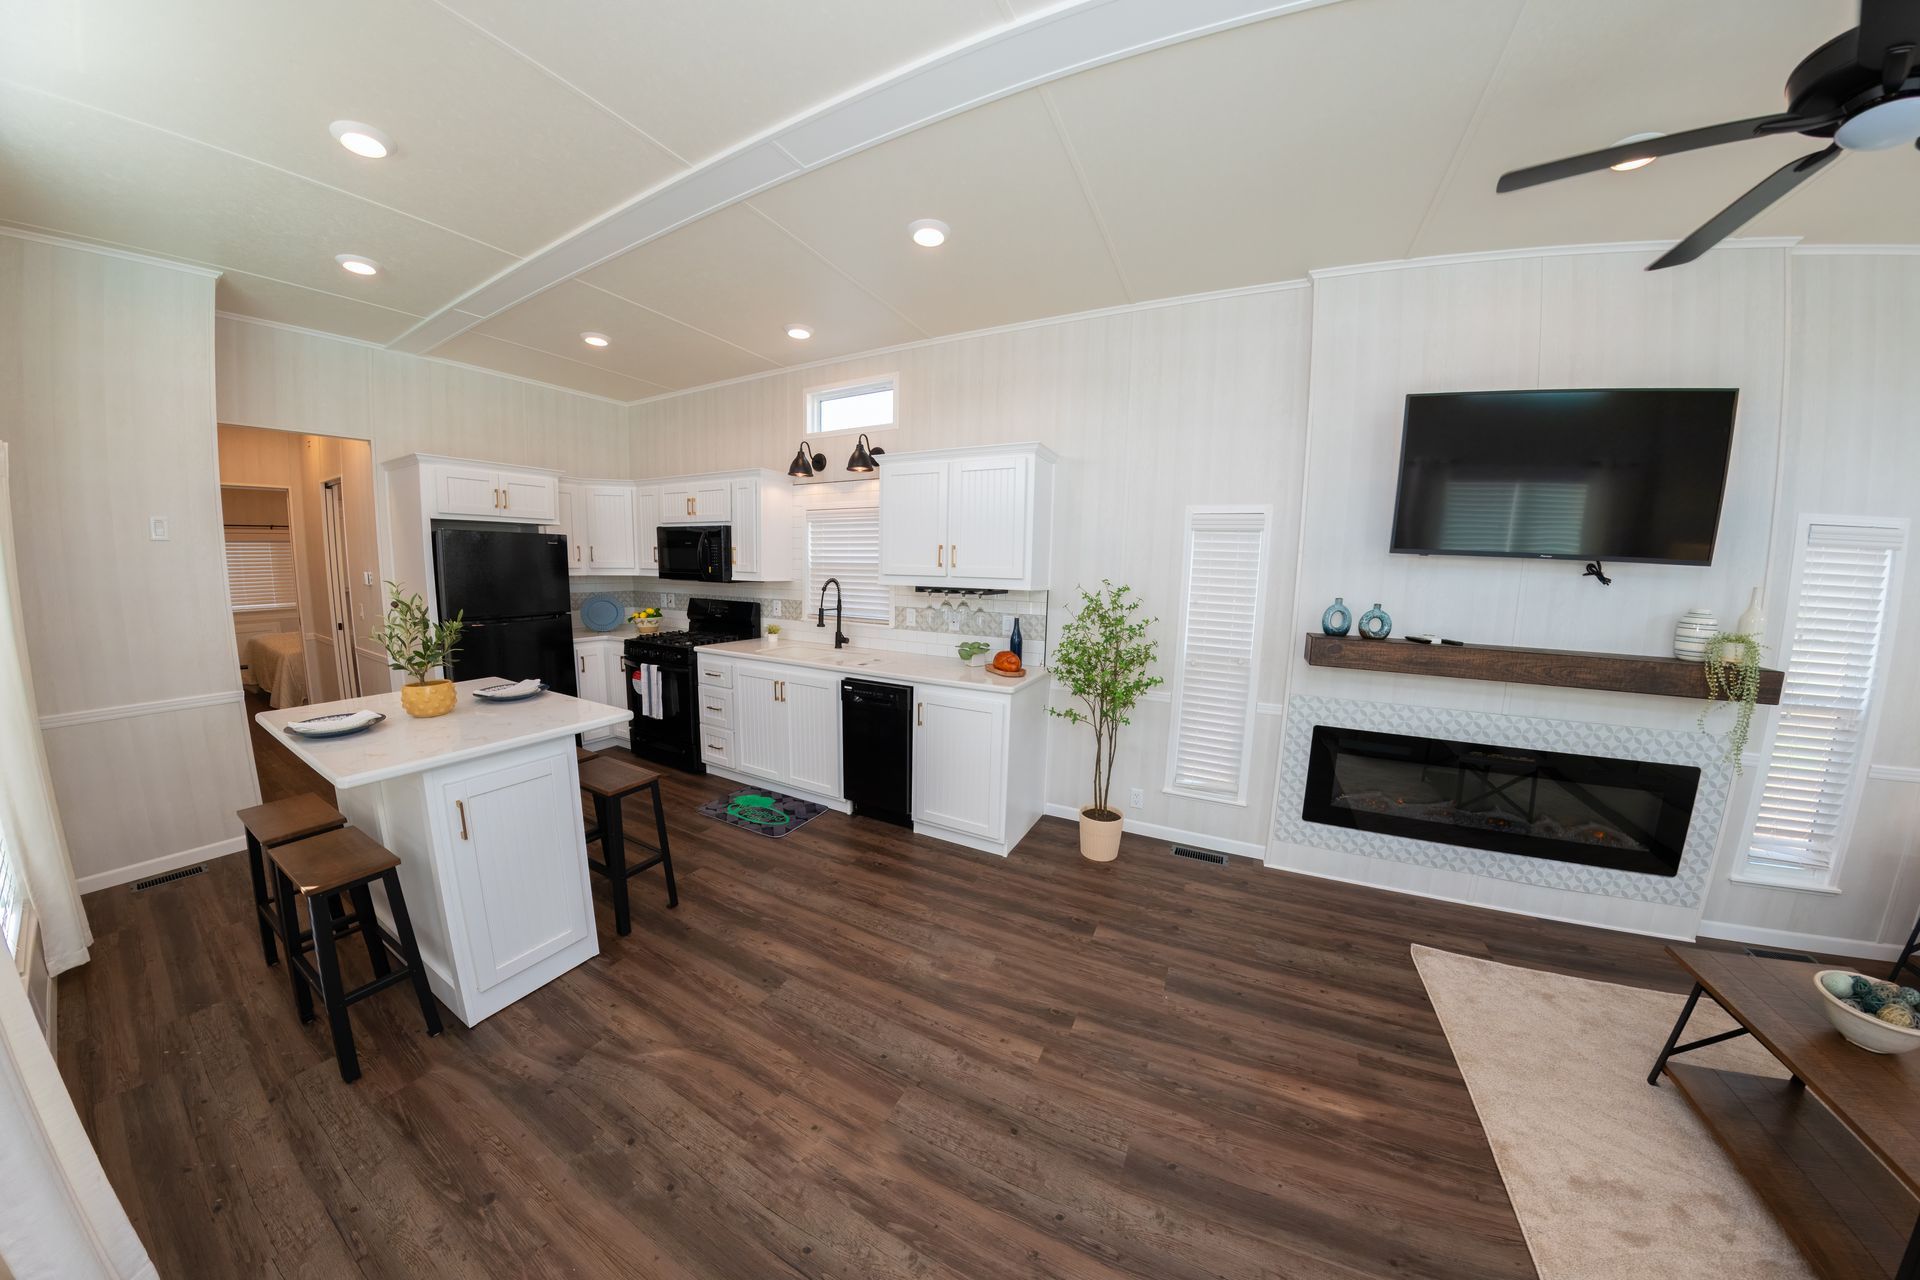 a kitchen , living room , and fireplace in a mobile home .